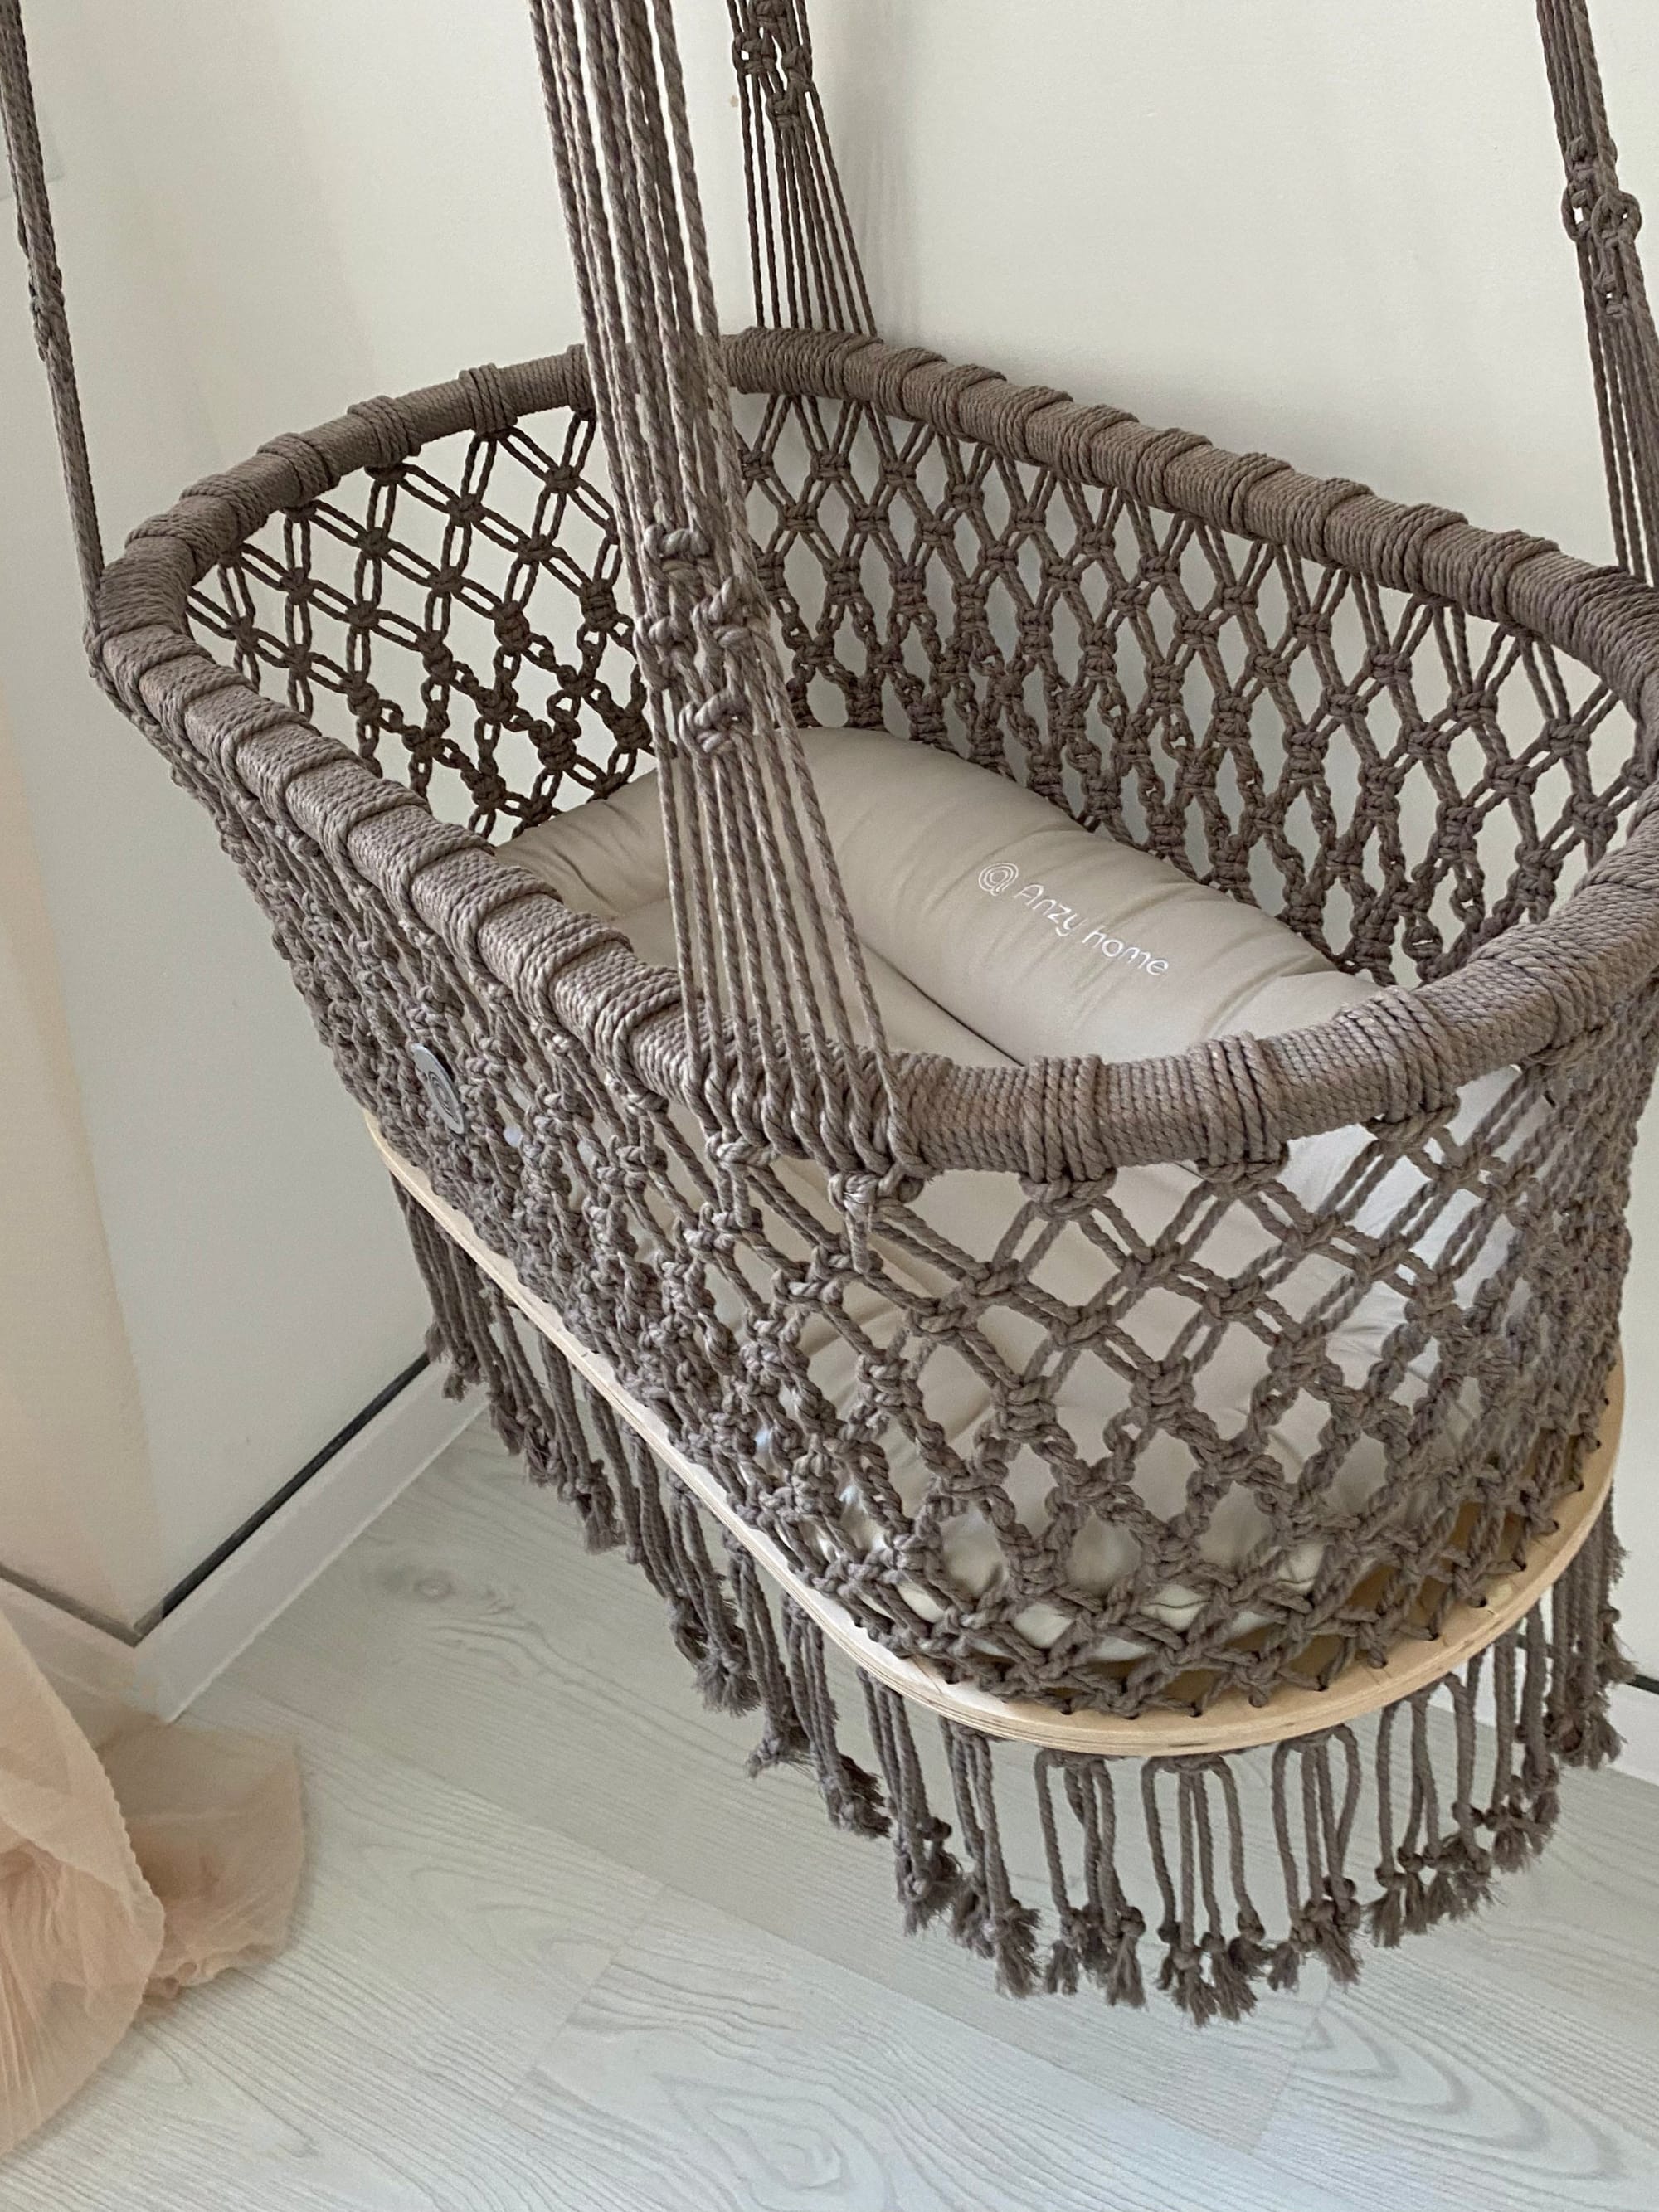 Hanging macrame baby bassinet by Anzy Home